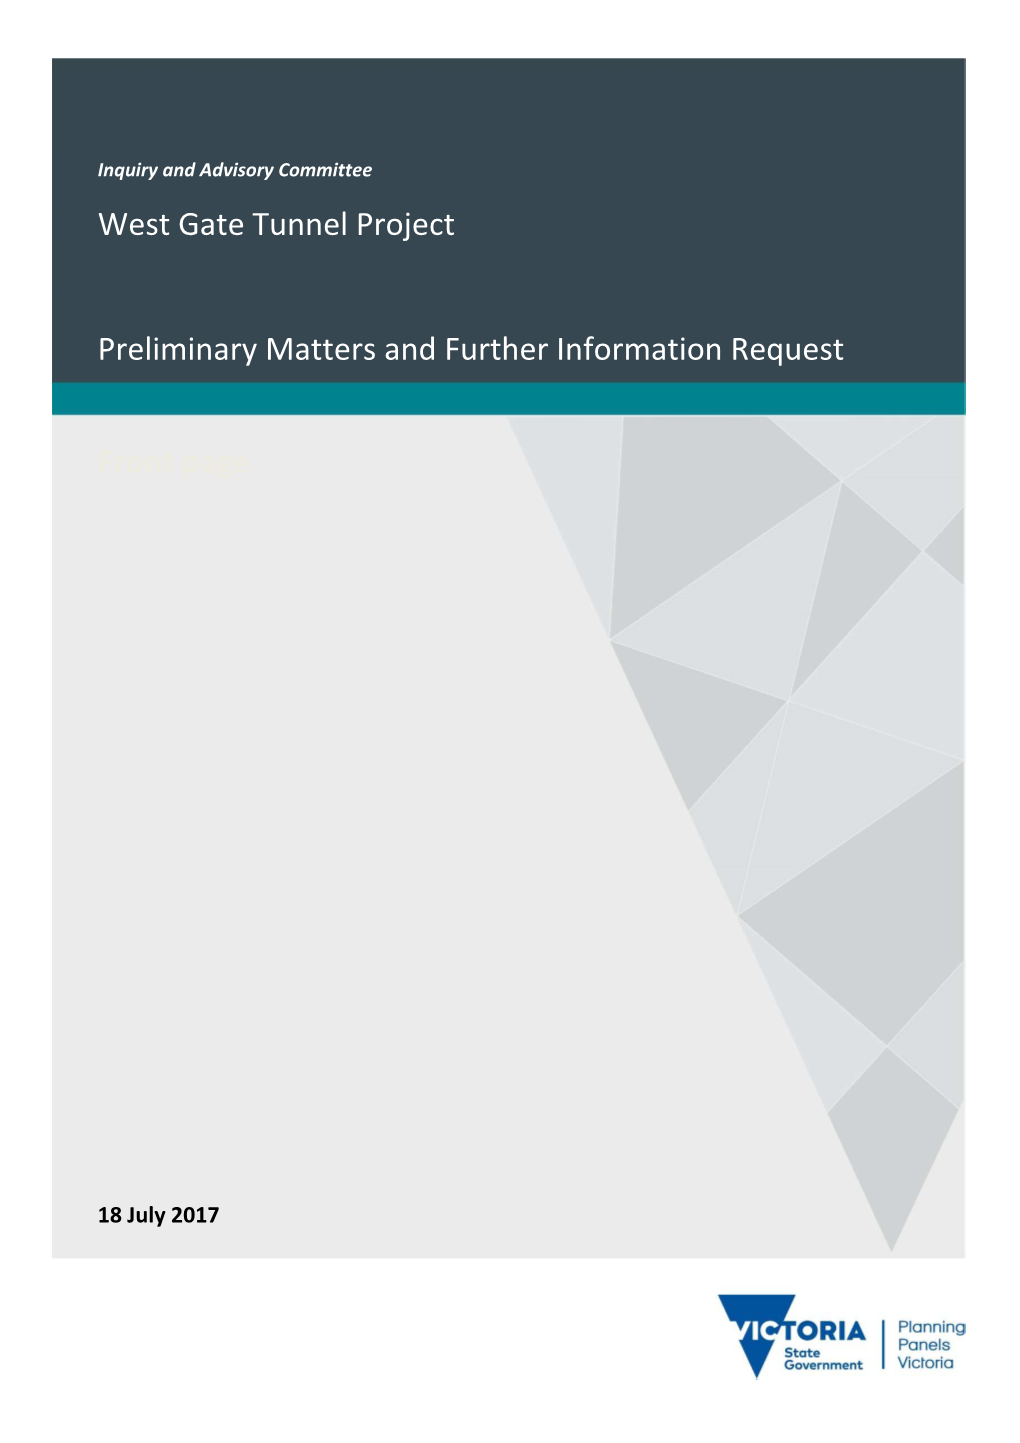 West Gate Tunnel Project Preliminary Matters and Further Information